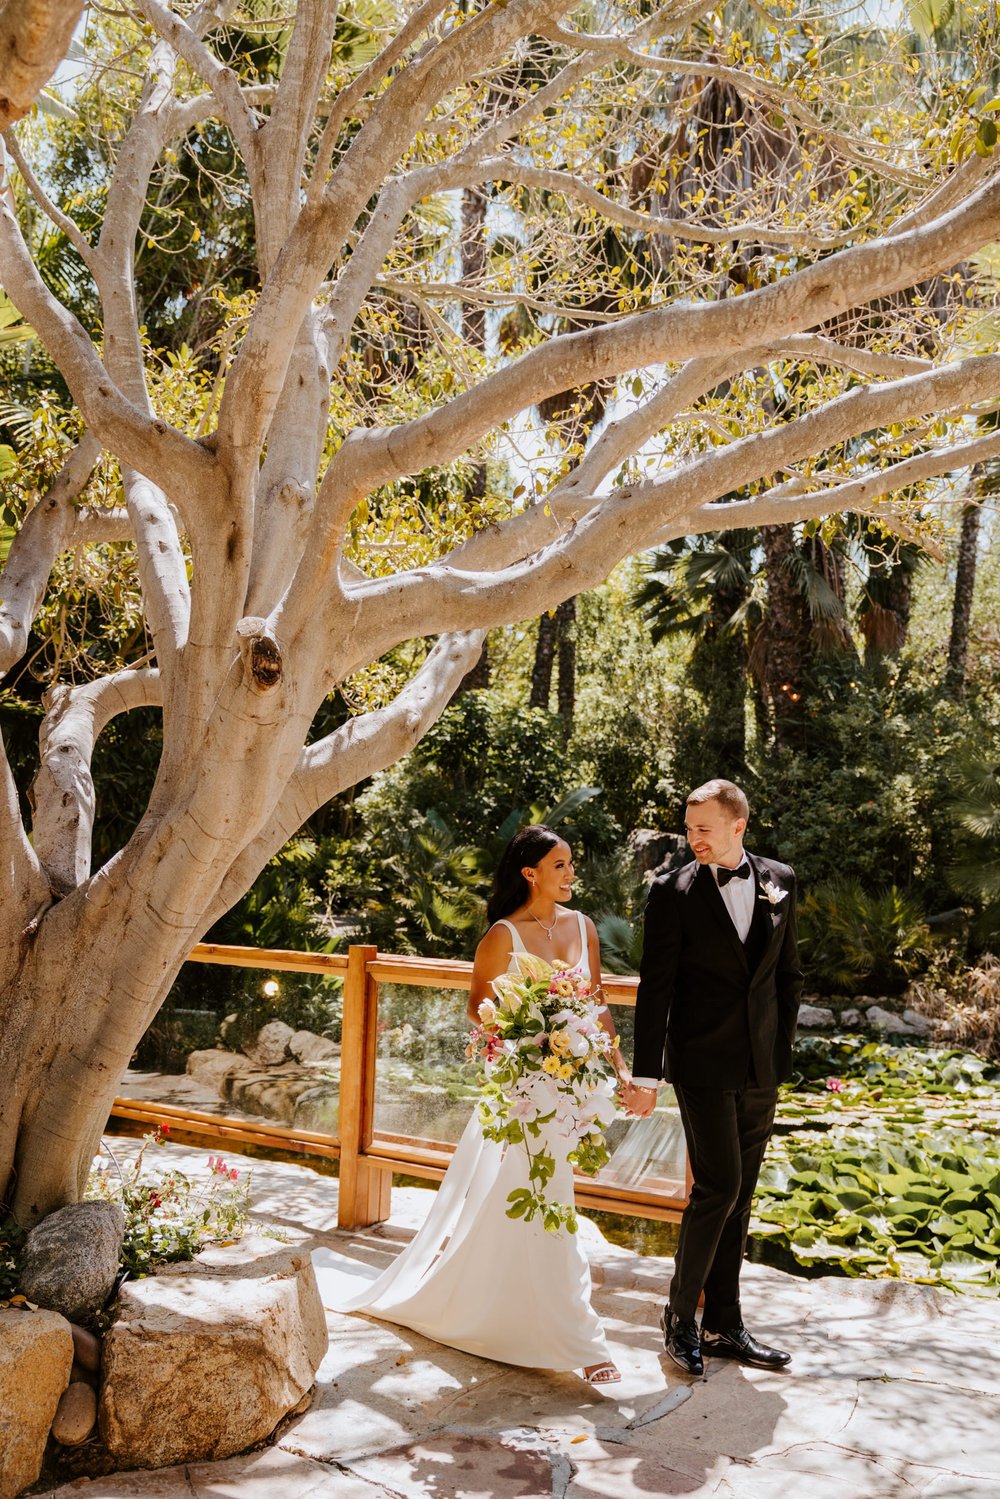 Tropical bride and groom portrait at Botanica Oceanside, photo by Tida Svy Photography, San Diego wedding photographer